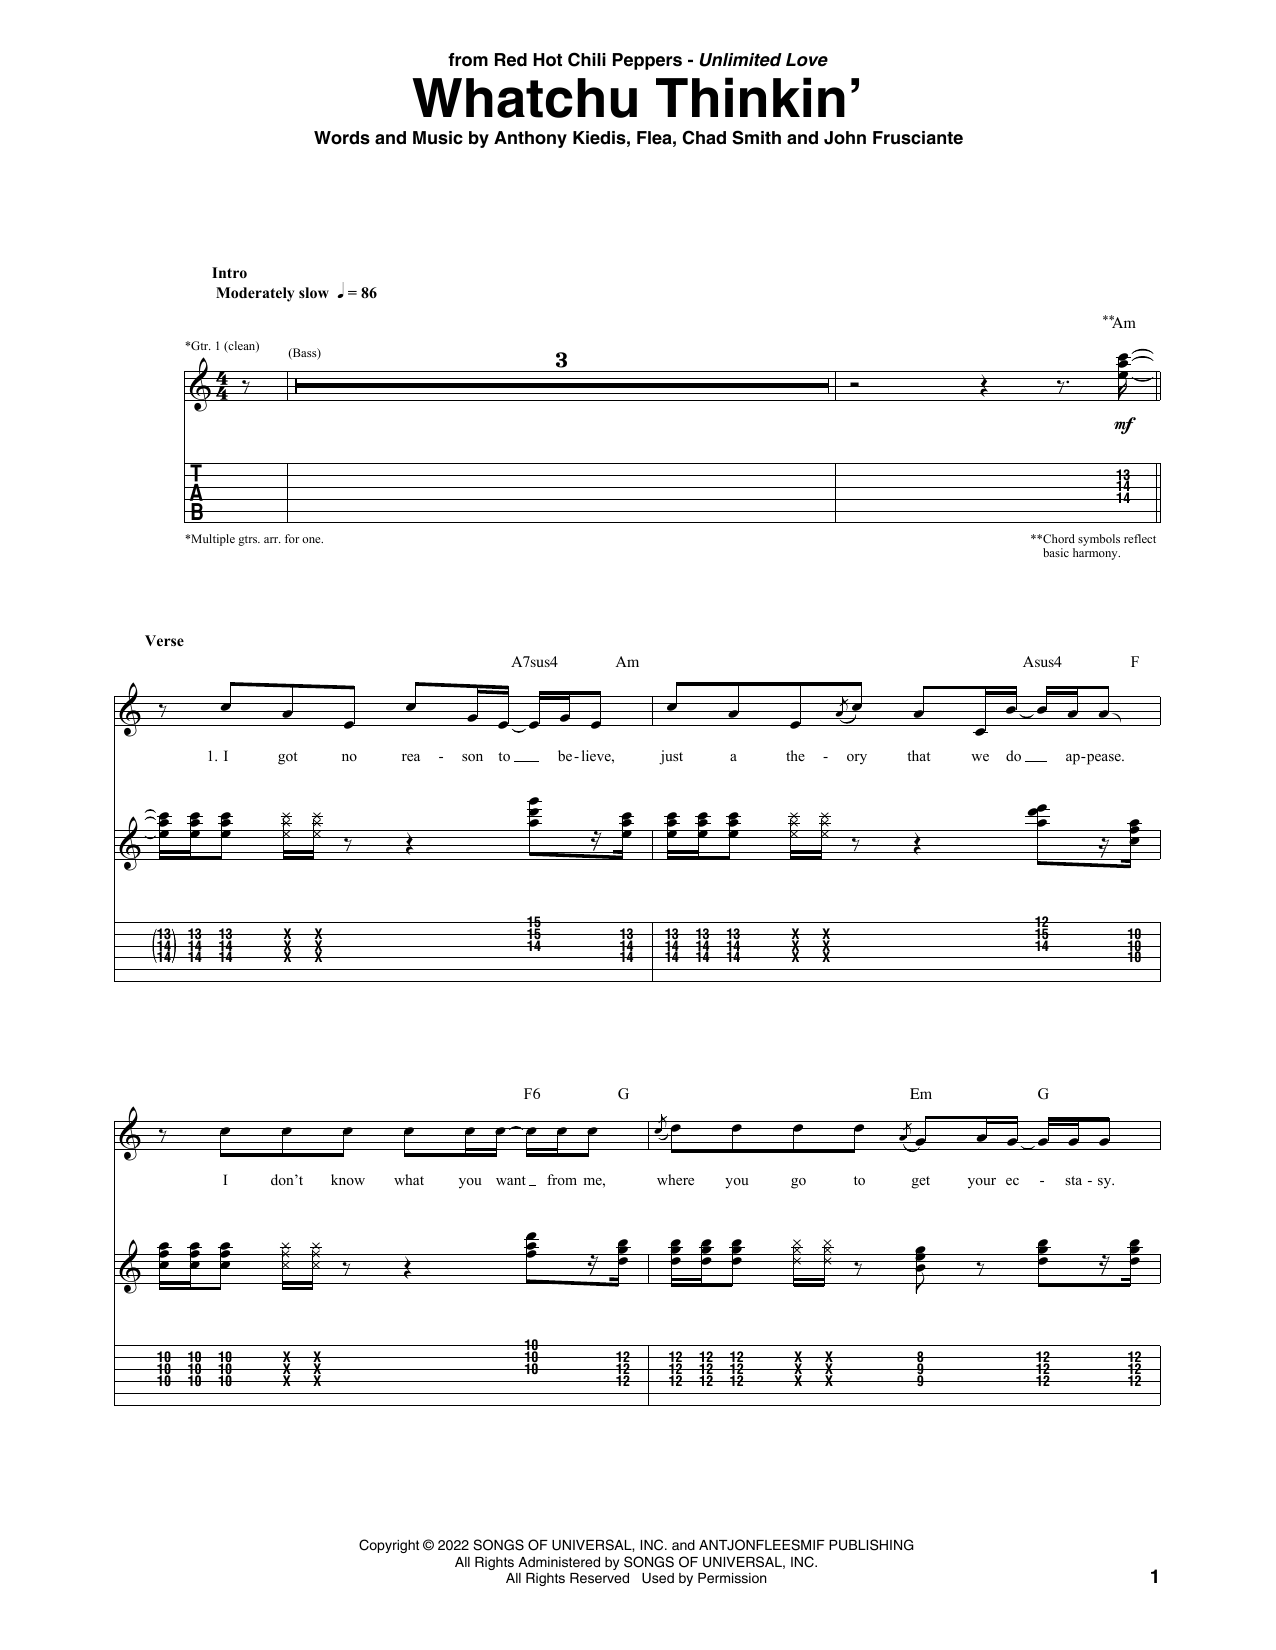 Download Red Hot Chili Peppers Whatchu Thinkin' Sheet Music